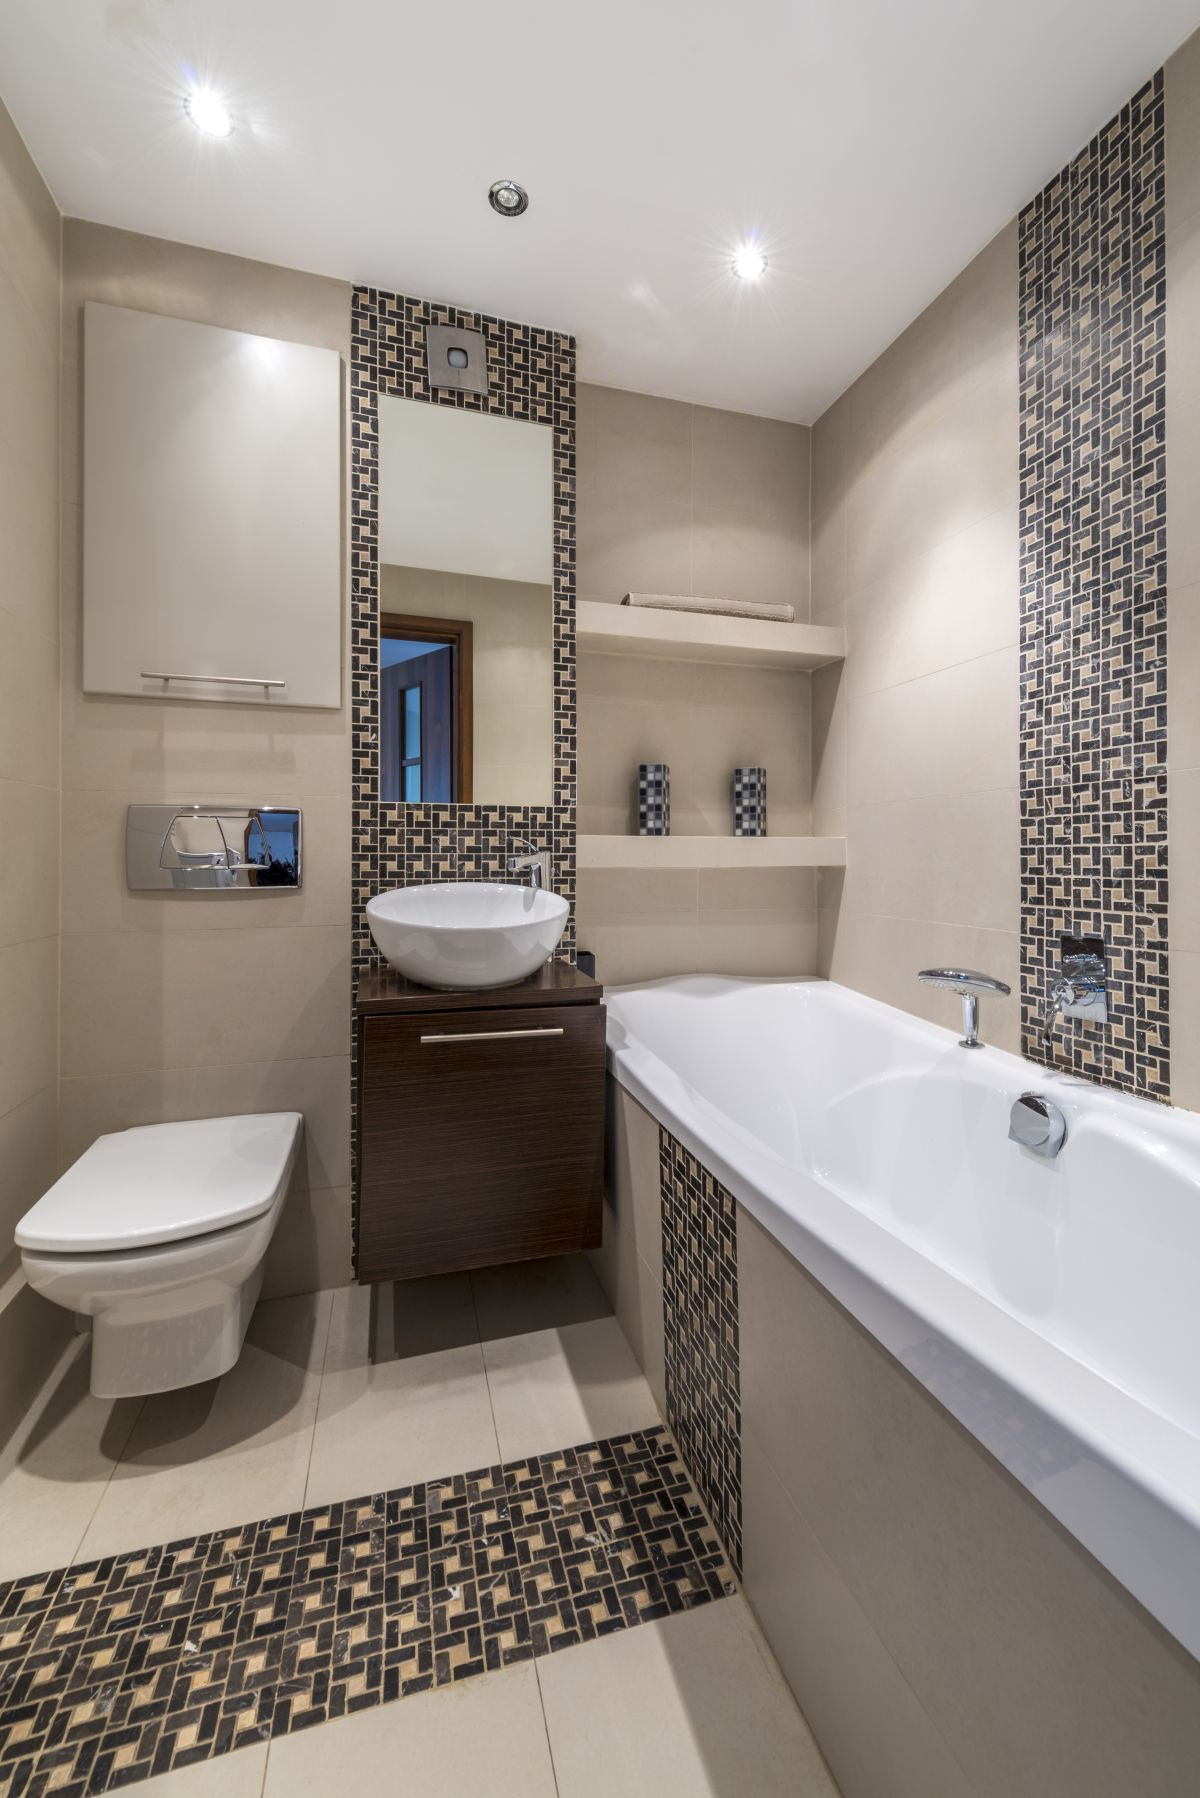 Small Bathroom Remodel Cost
 Size Matters Bathroom Renovation Costs for Your Size Bath